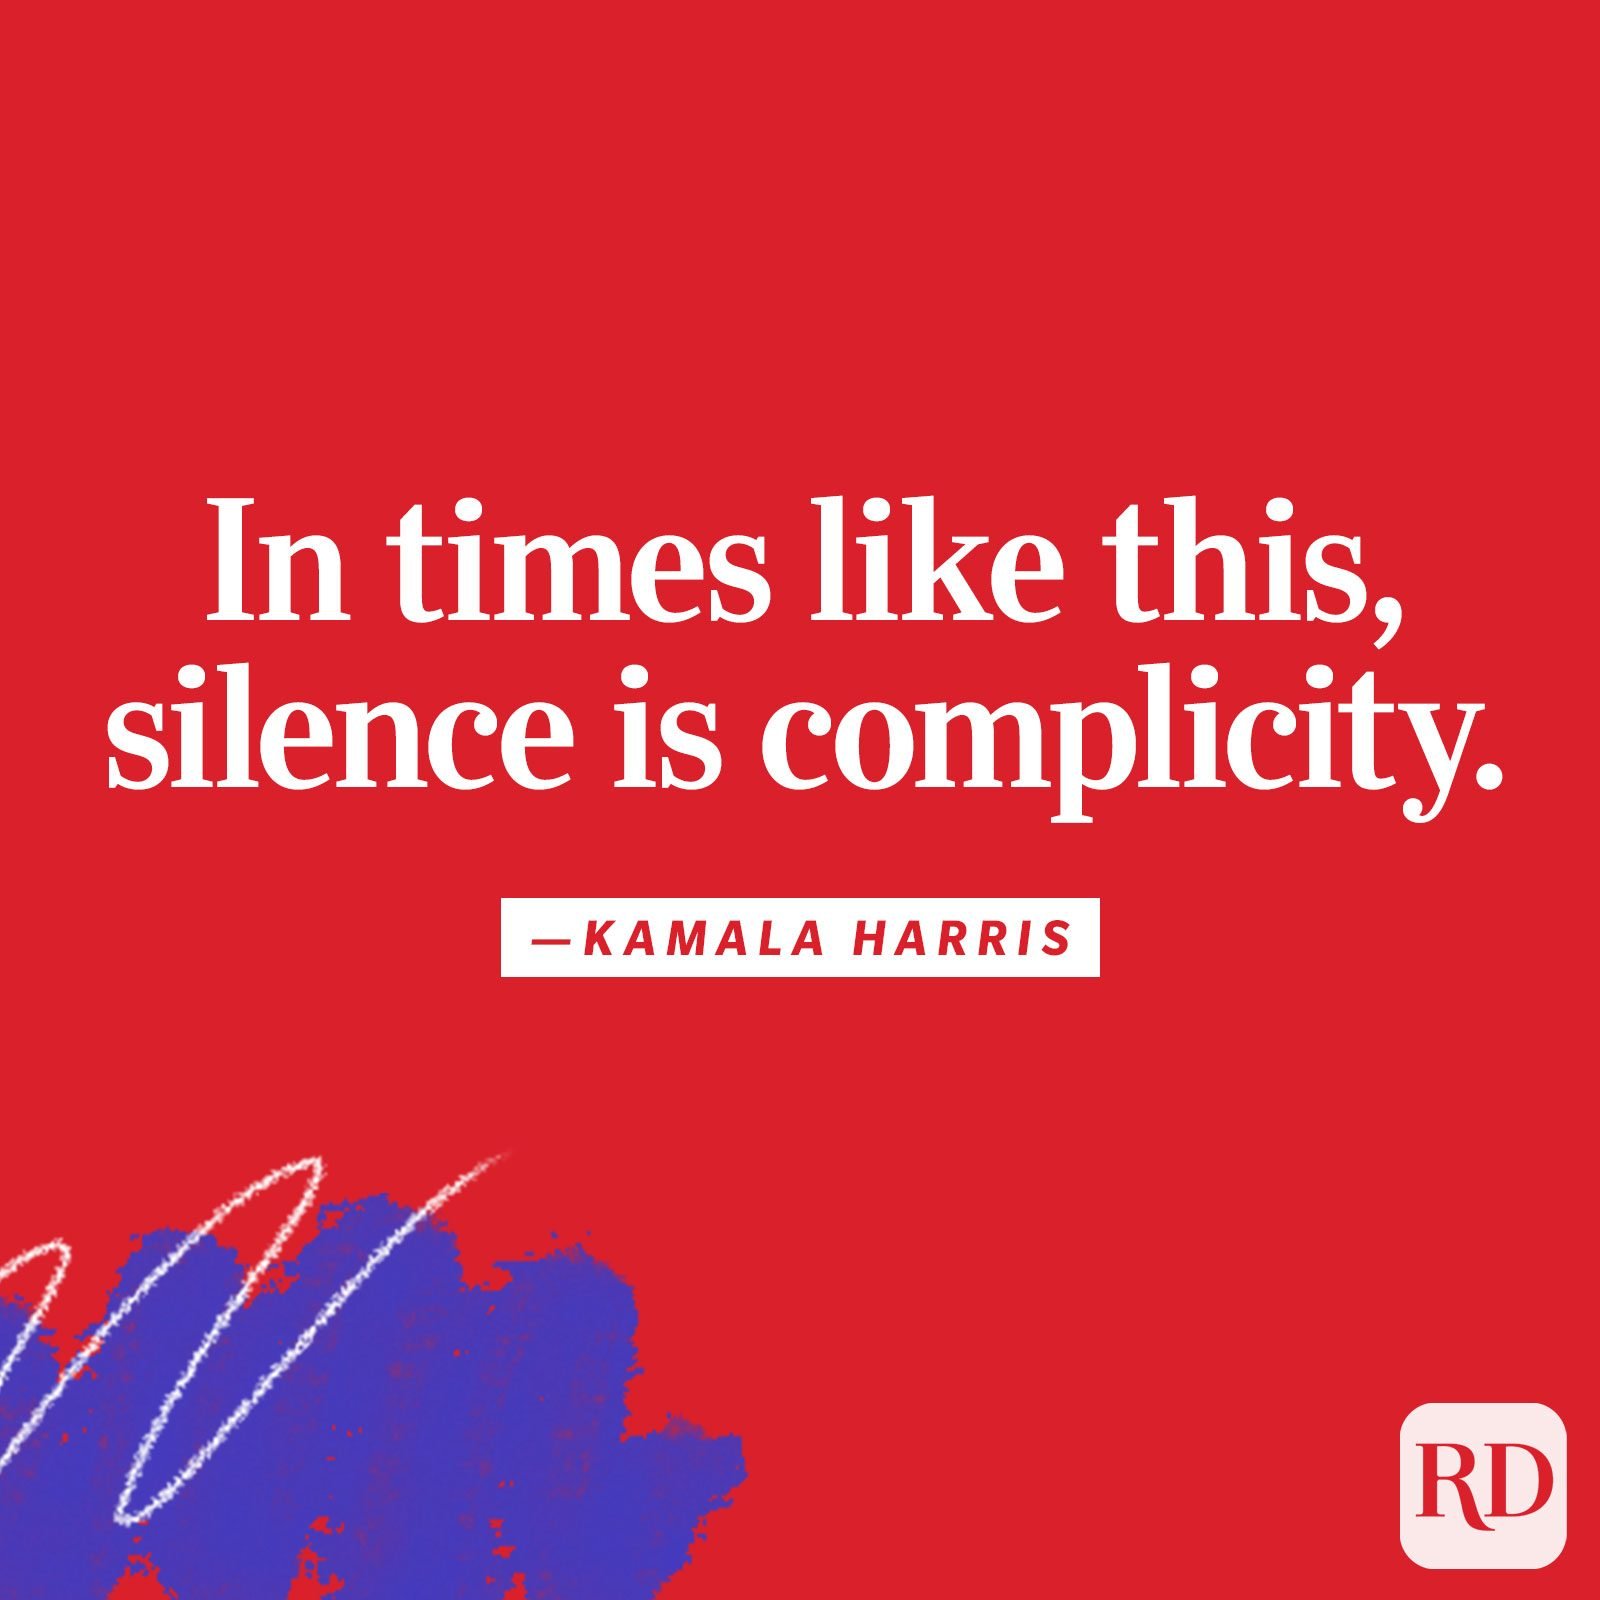 "In times like this, silence is complicity."